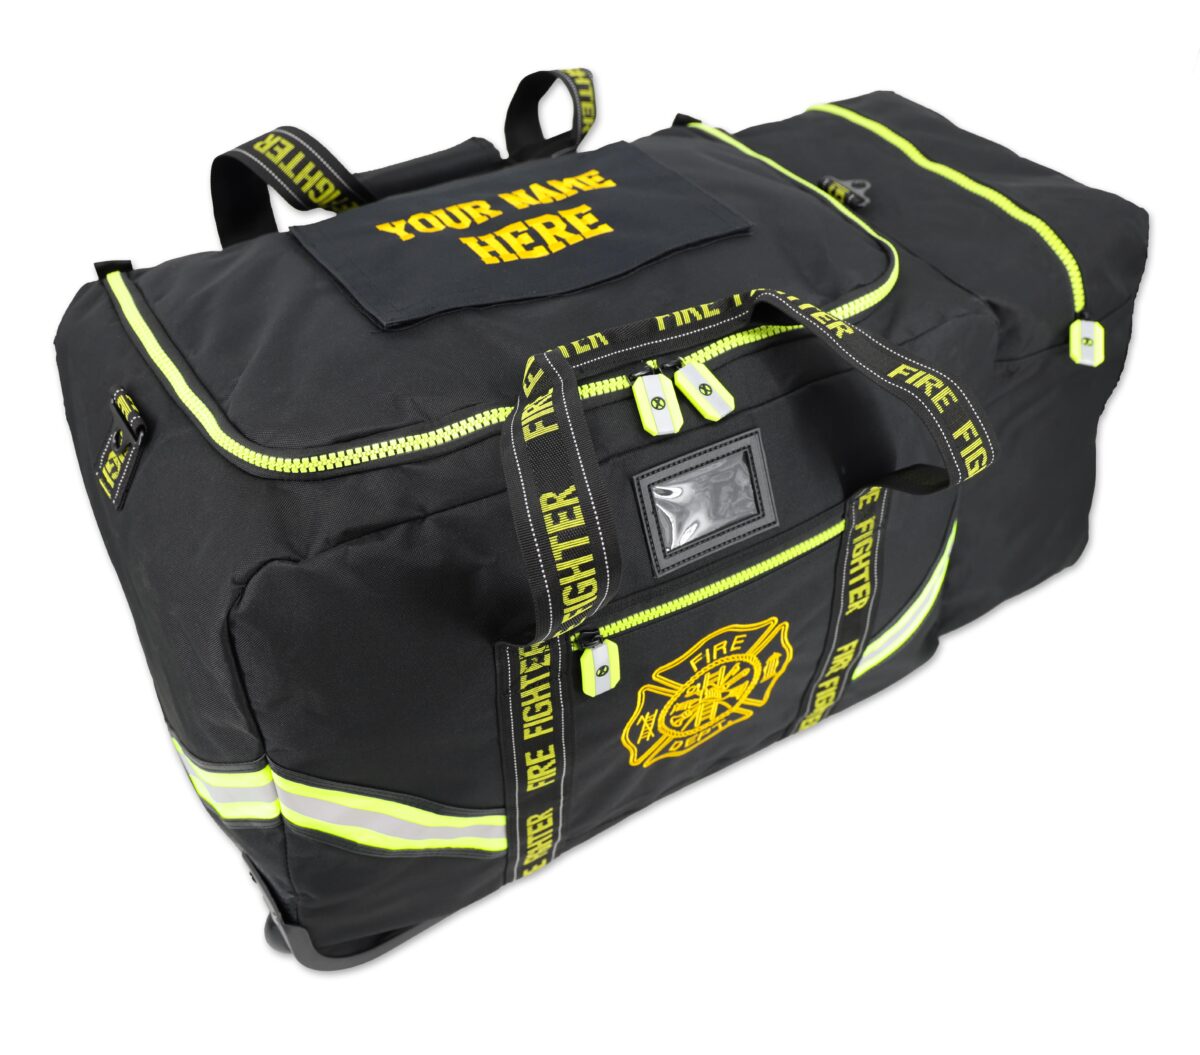 lightning x lxfb10wv firefighter step in rolling turnout bunker gear bag with wheels and reflective black